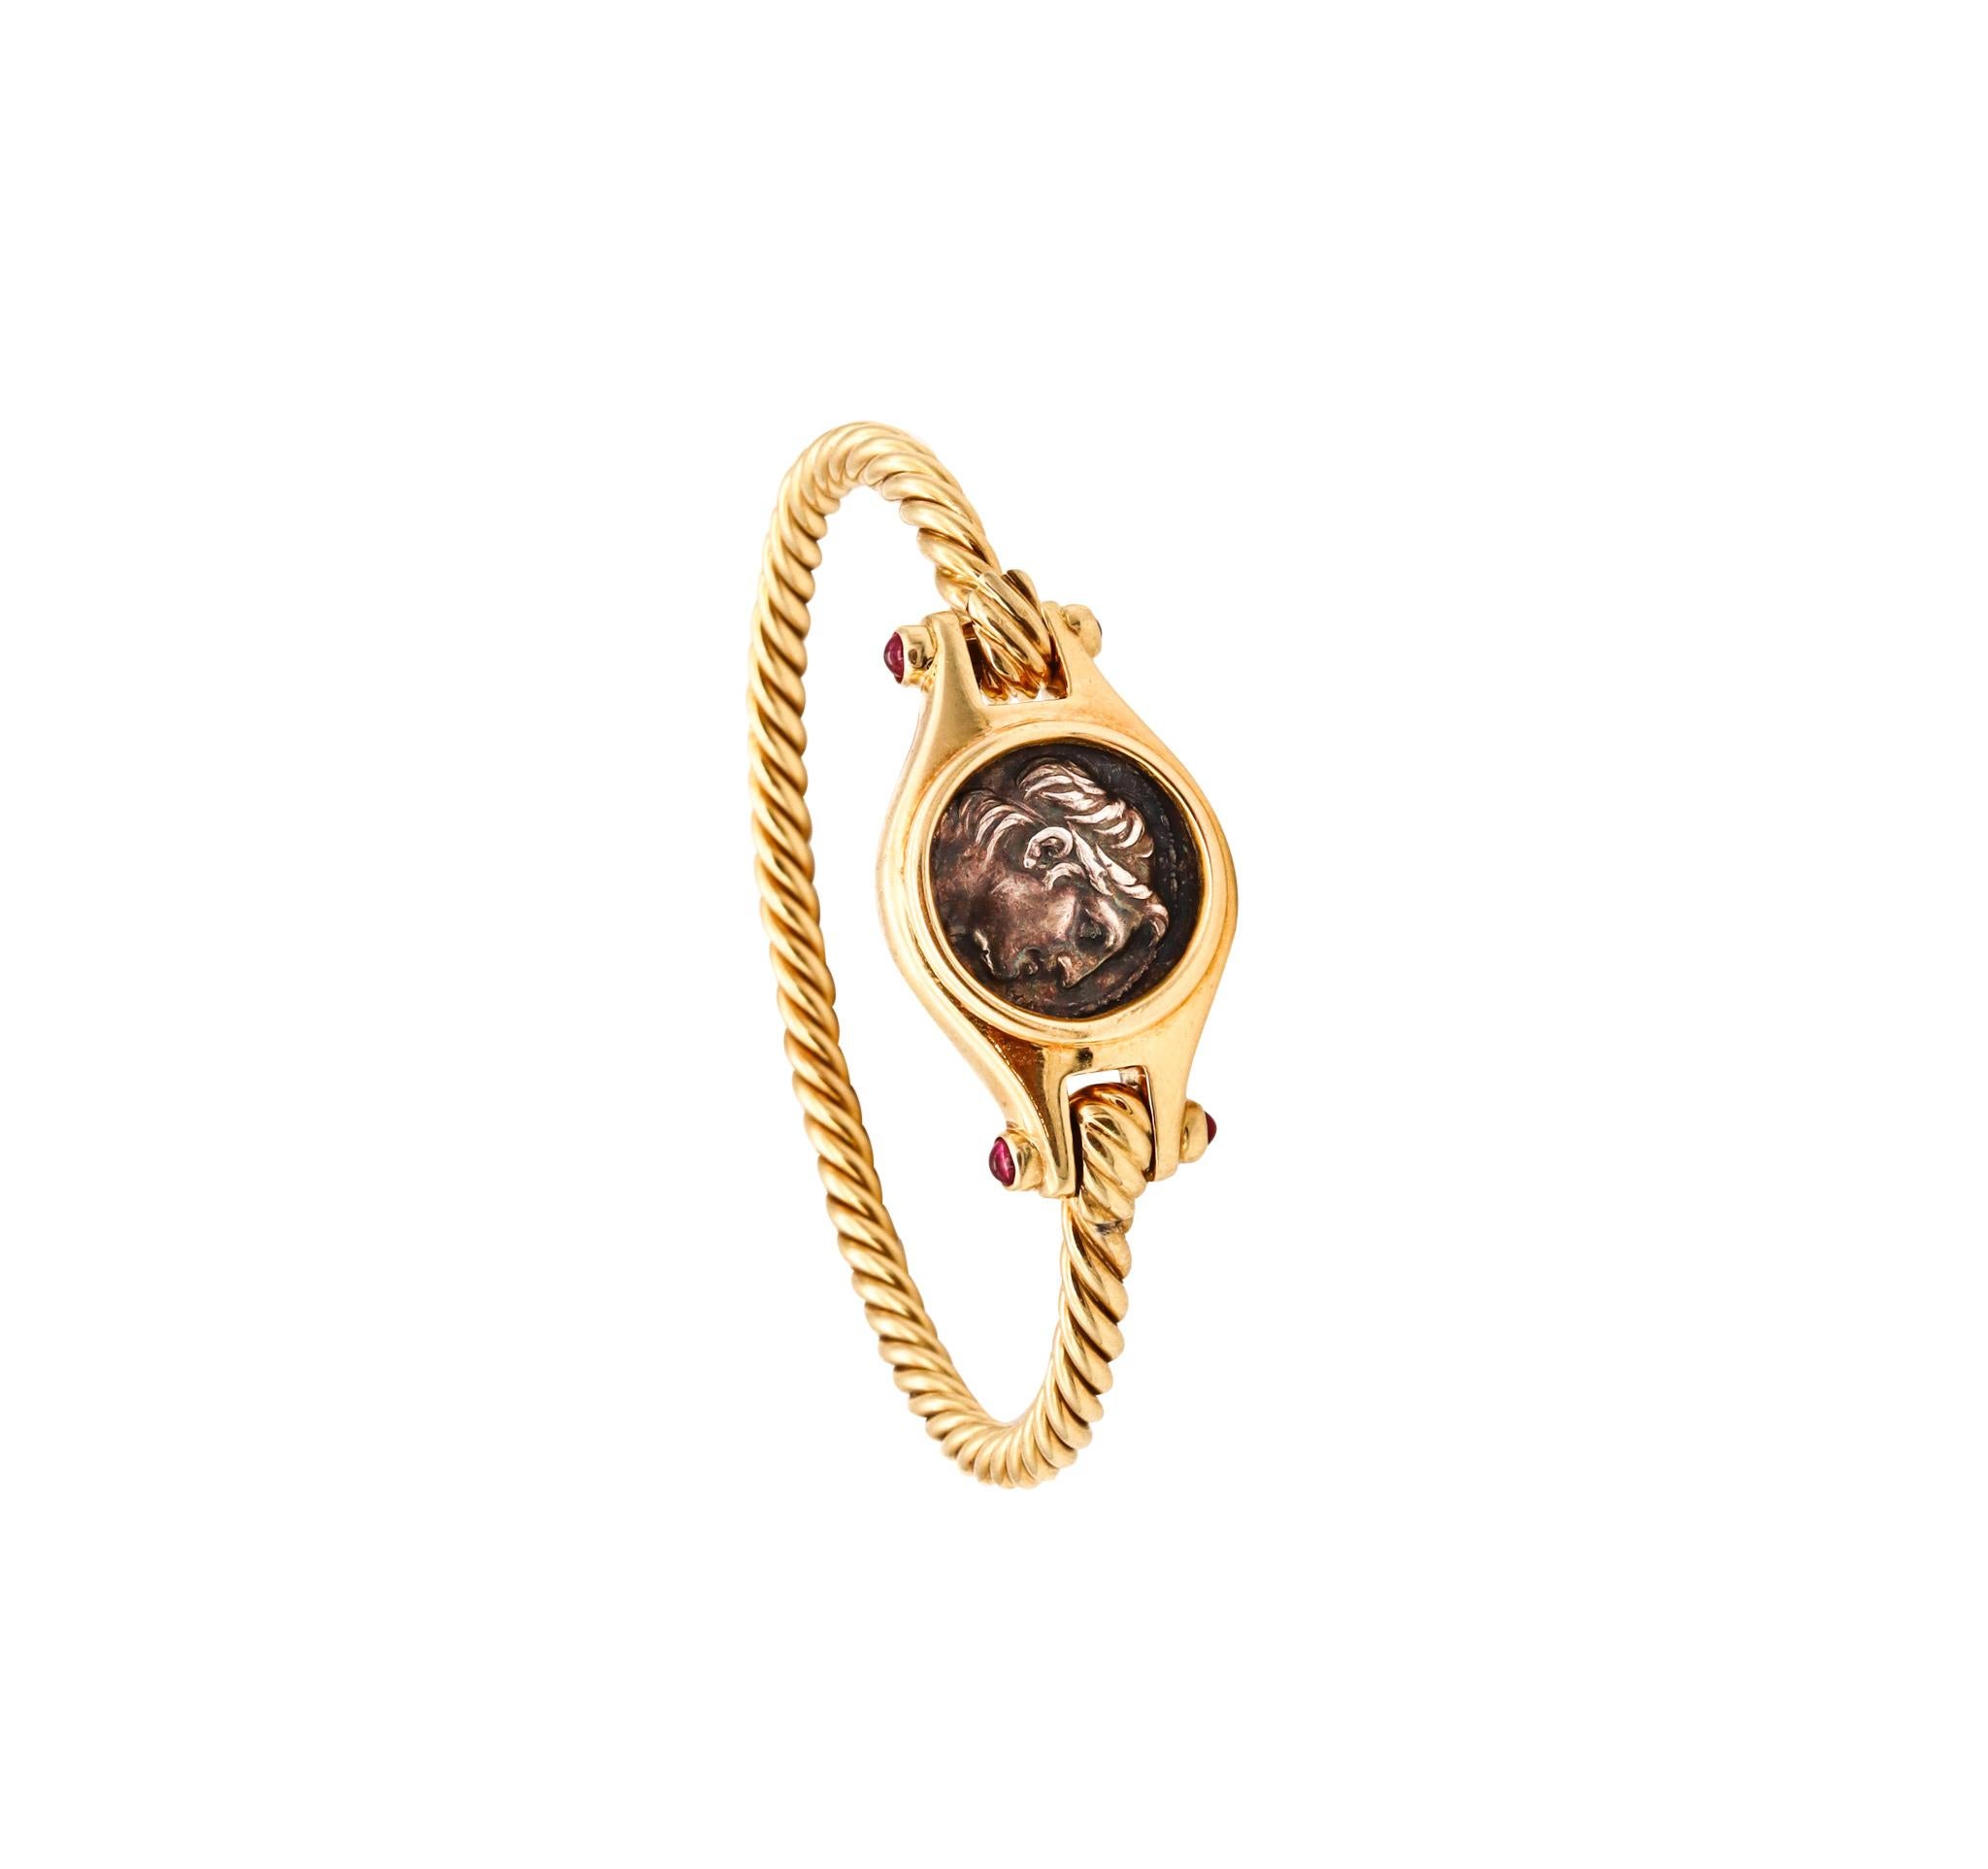 A Monete bracelet designed by Bvlgari.

An conic and popular piece created in Rome, Italy by the house of Bvlgari, back in the 1970's. This rare Monete bracelet has been crafted, with classic Greek-revival patterns in solid yellow gold of 18 karats,